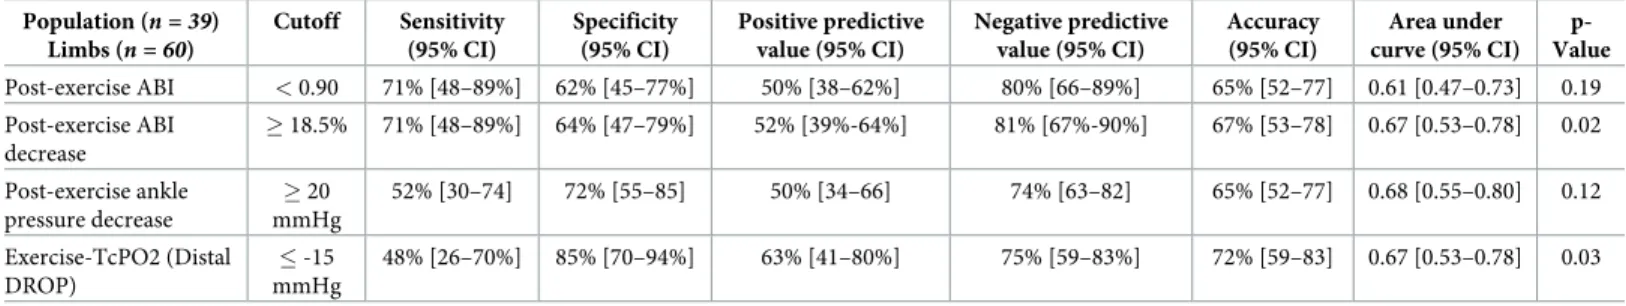 Table 4. Exercise test characteristics for identifying stenosis � 50% in any limb among the 60 limbs with normal ABIs (&gt; 0.91).